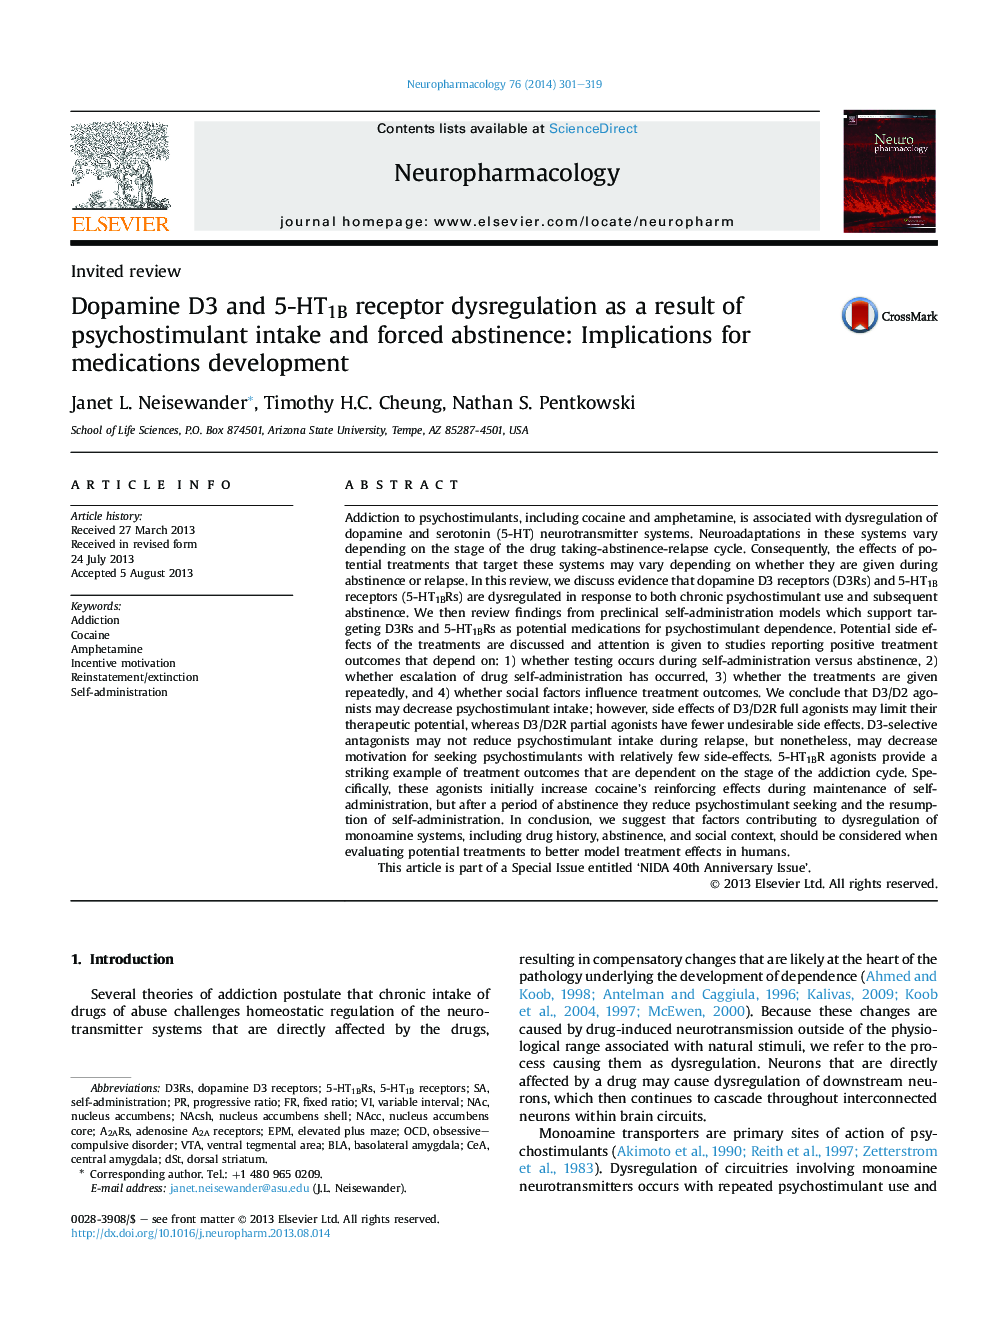 Dopamine D3 and 5-HT1B receptor dysregulation as a result of psychostimulant intake and forced abstinence: Implications for medications development